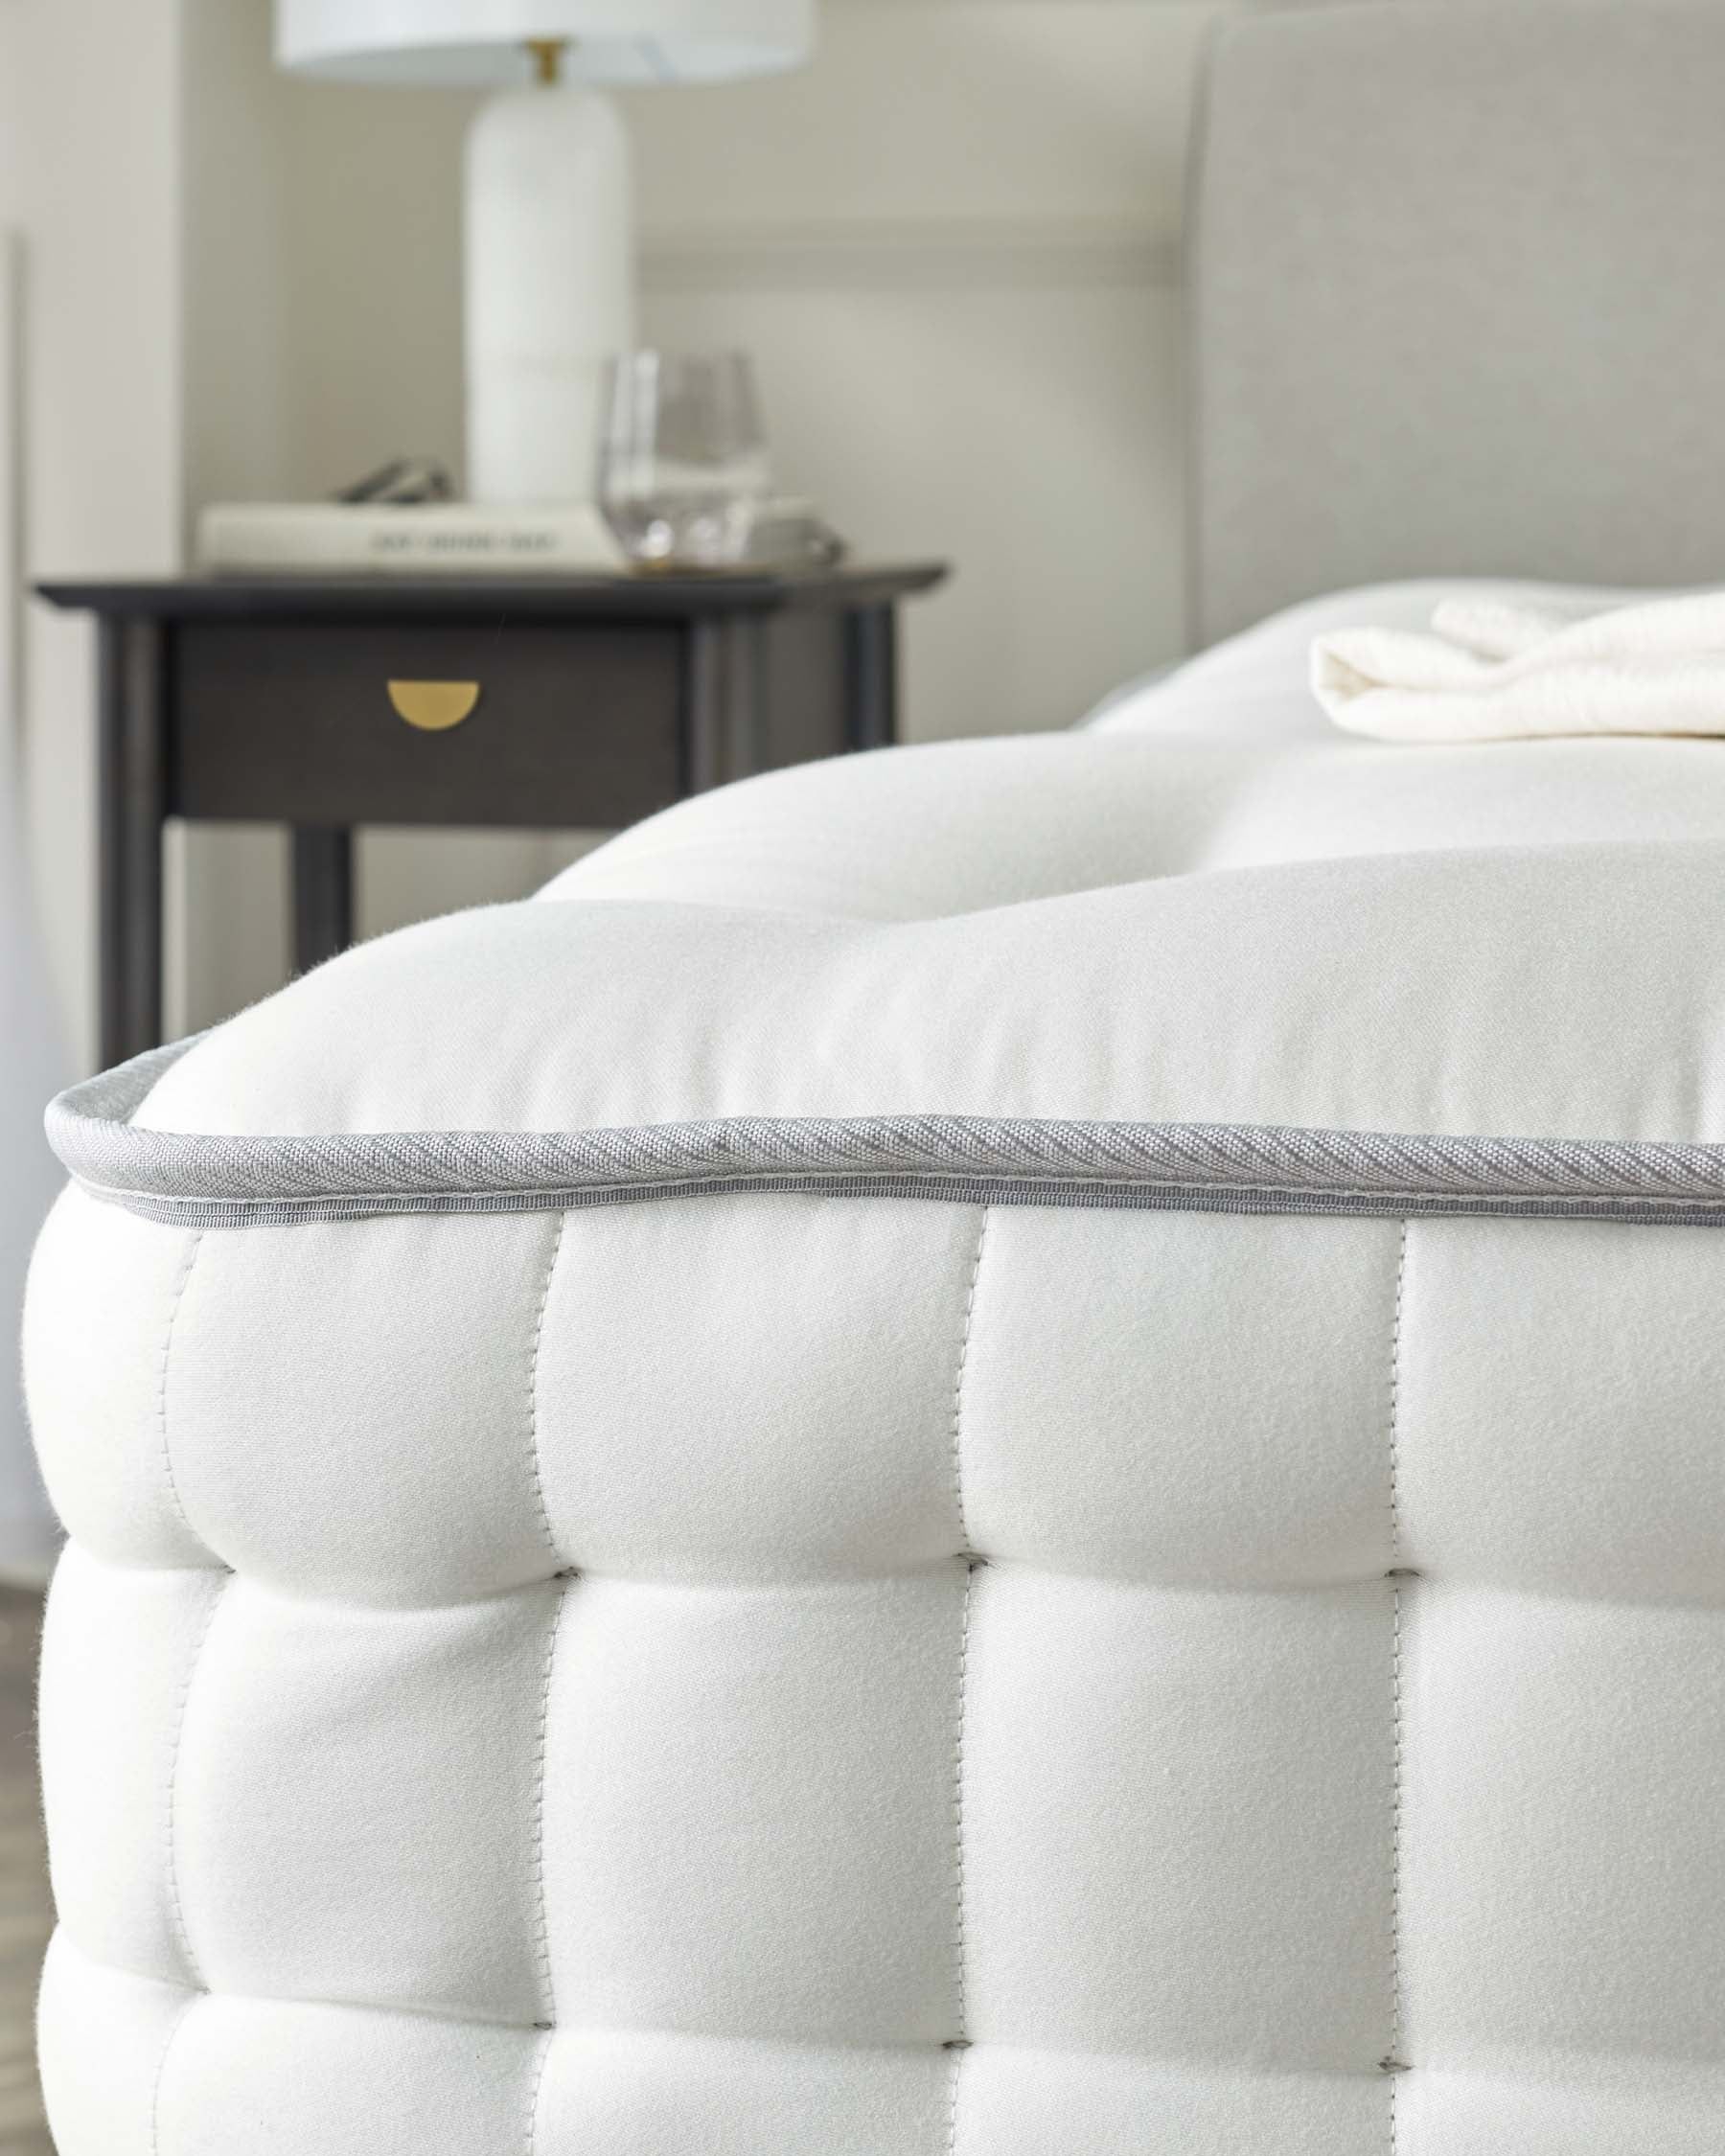 Comfortable Sleeping Mattress Get a Restful Night’s Sleep with These Top Mattresses